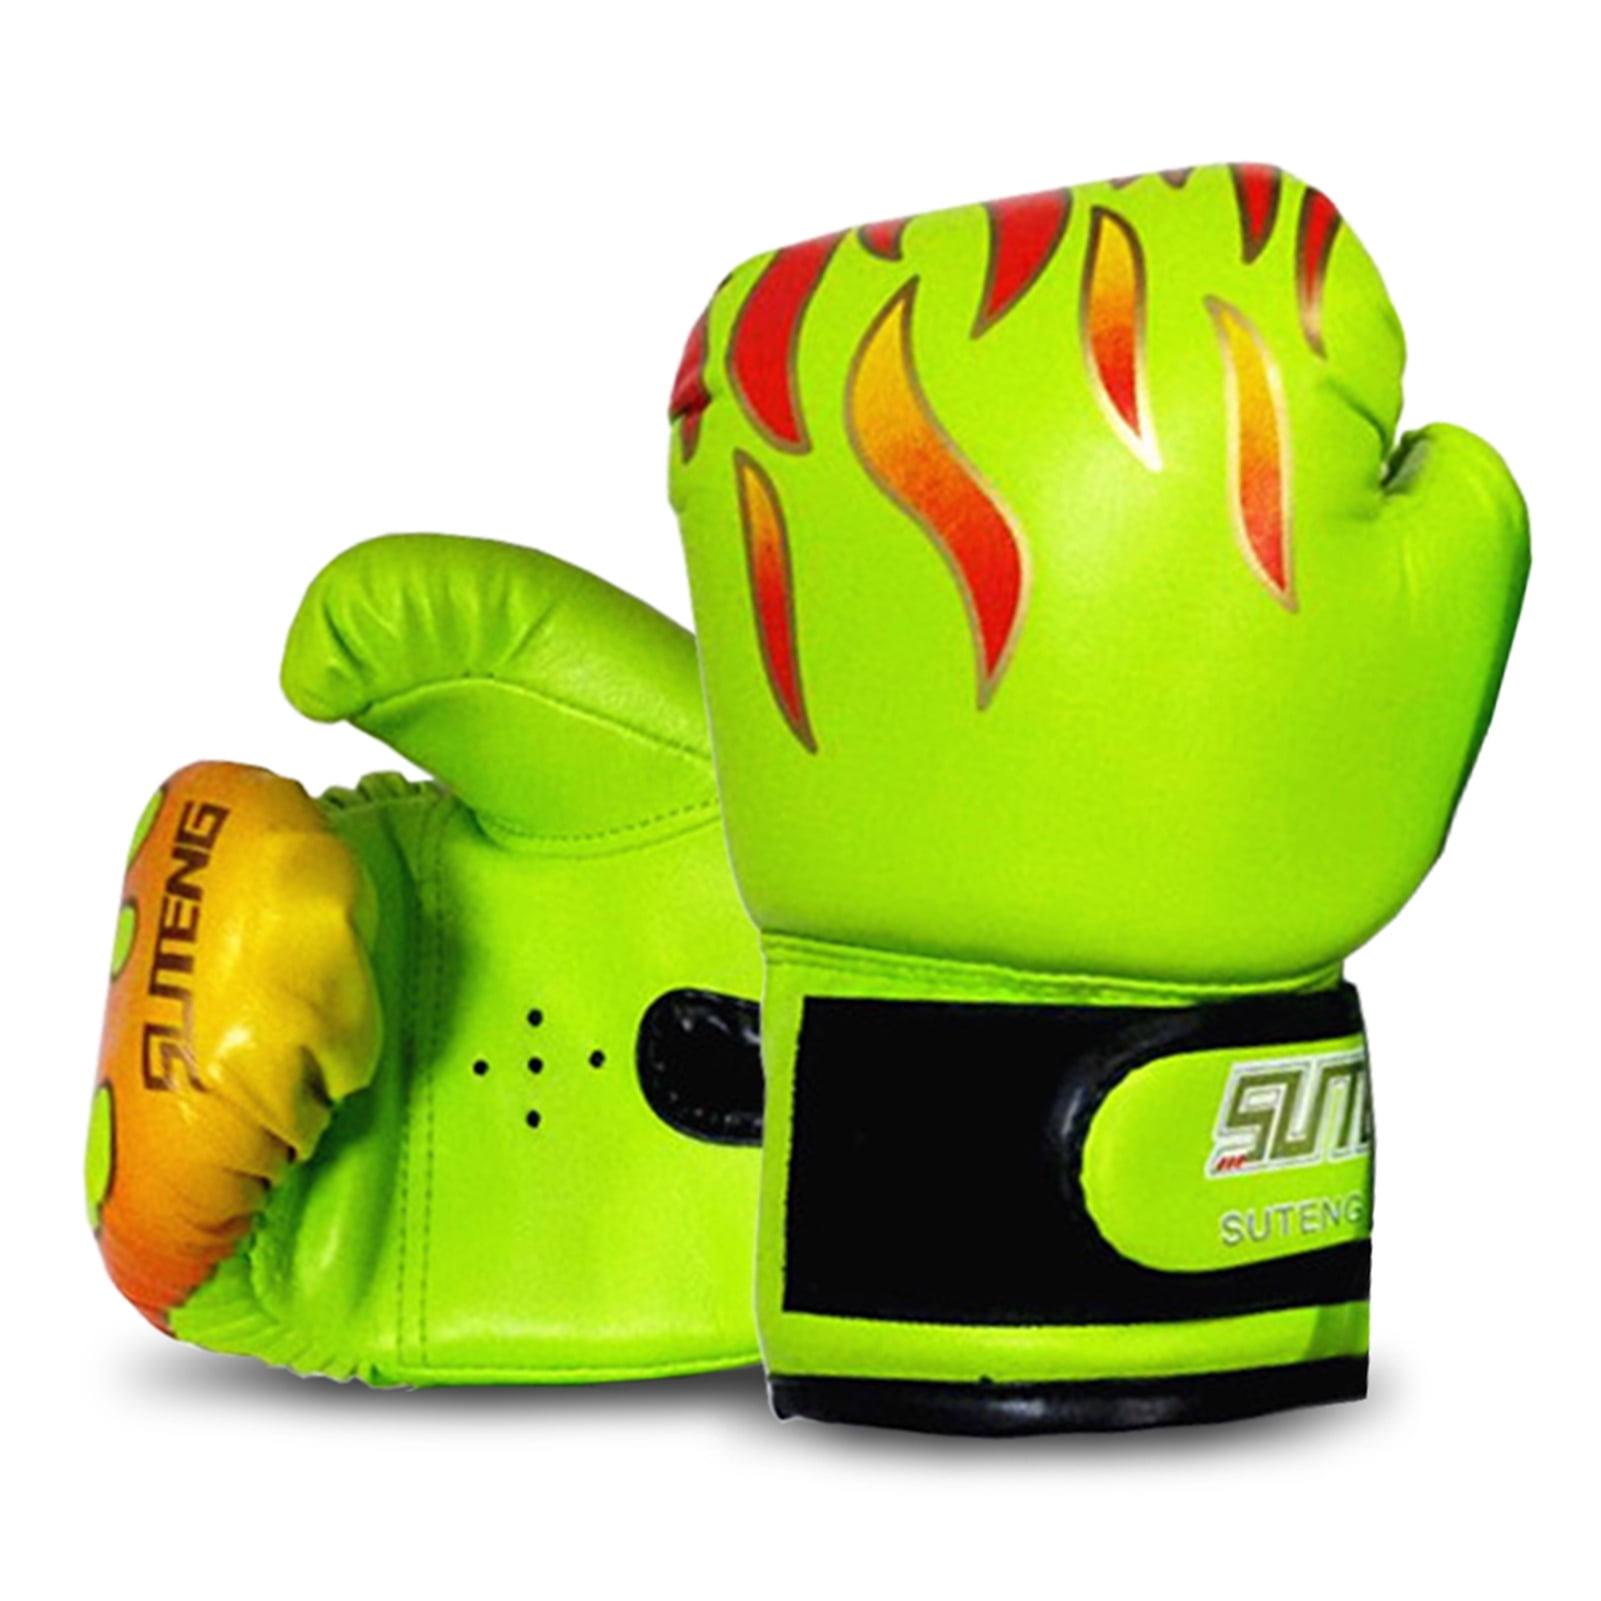 Pro Box Bag Mitts Xtreme Collection Boxing Training Gloves PU 